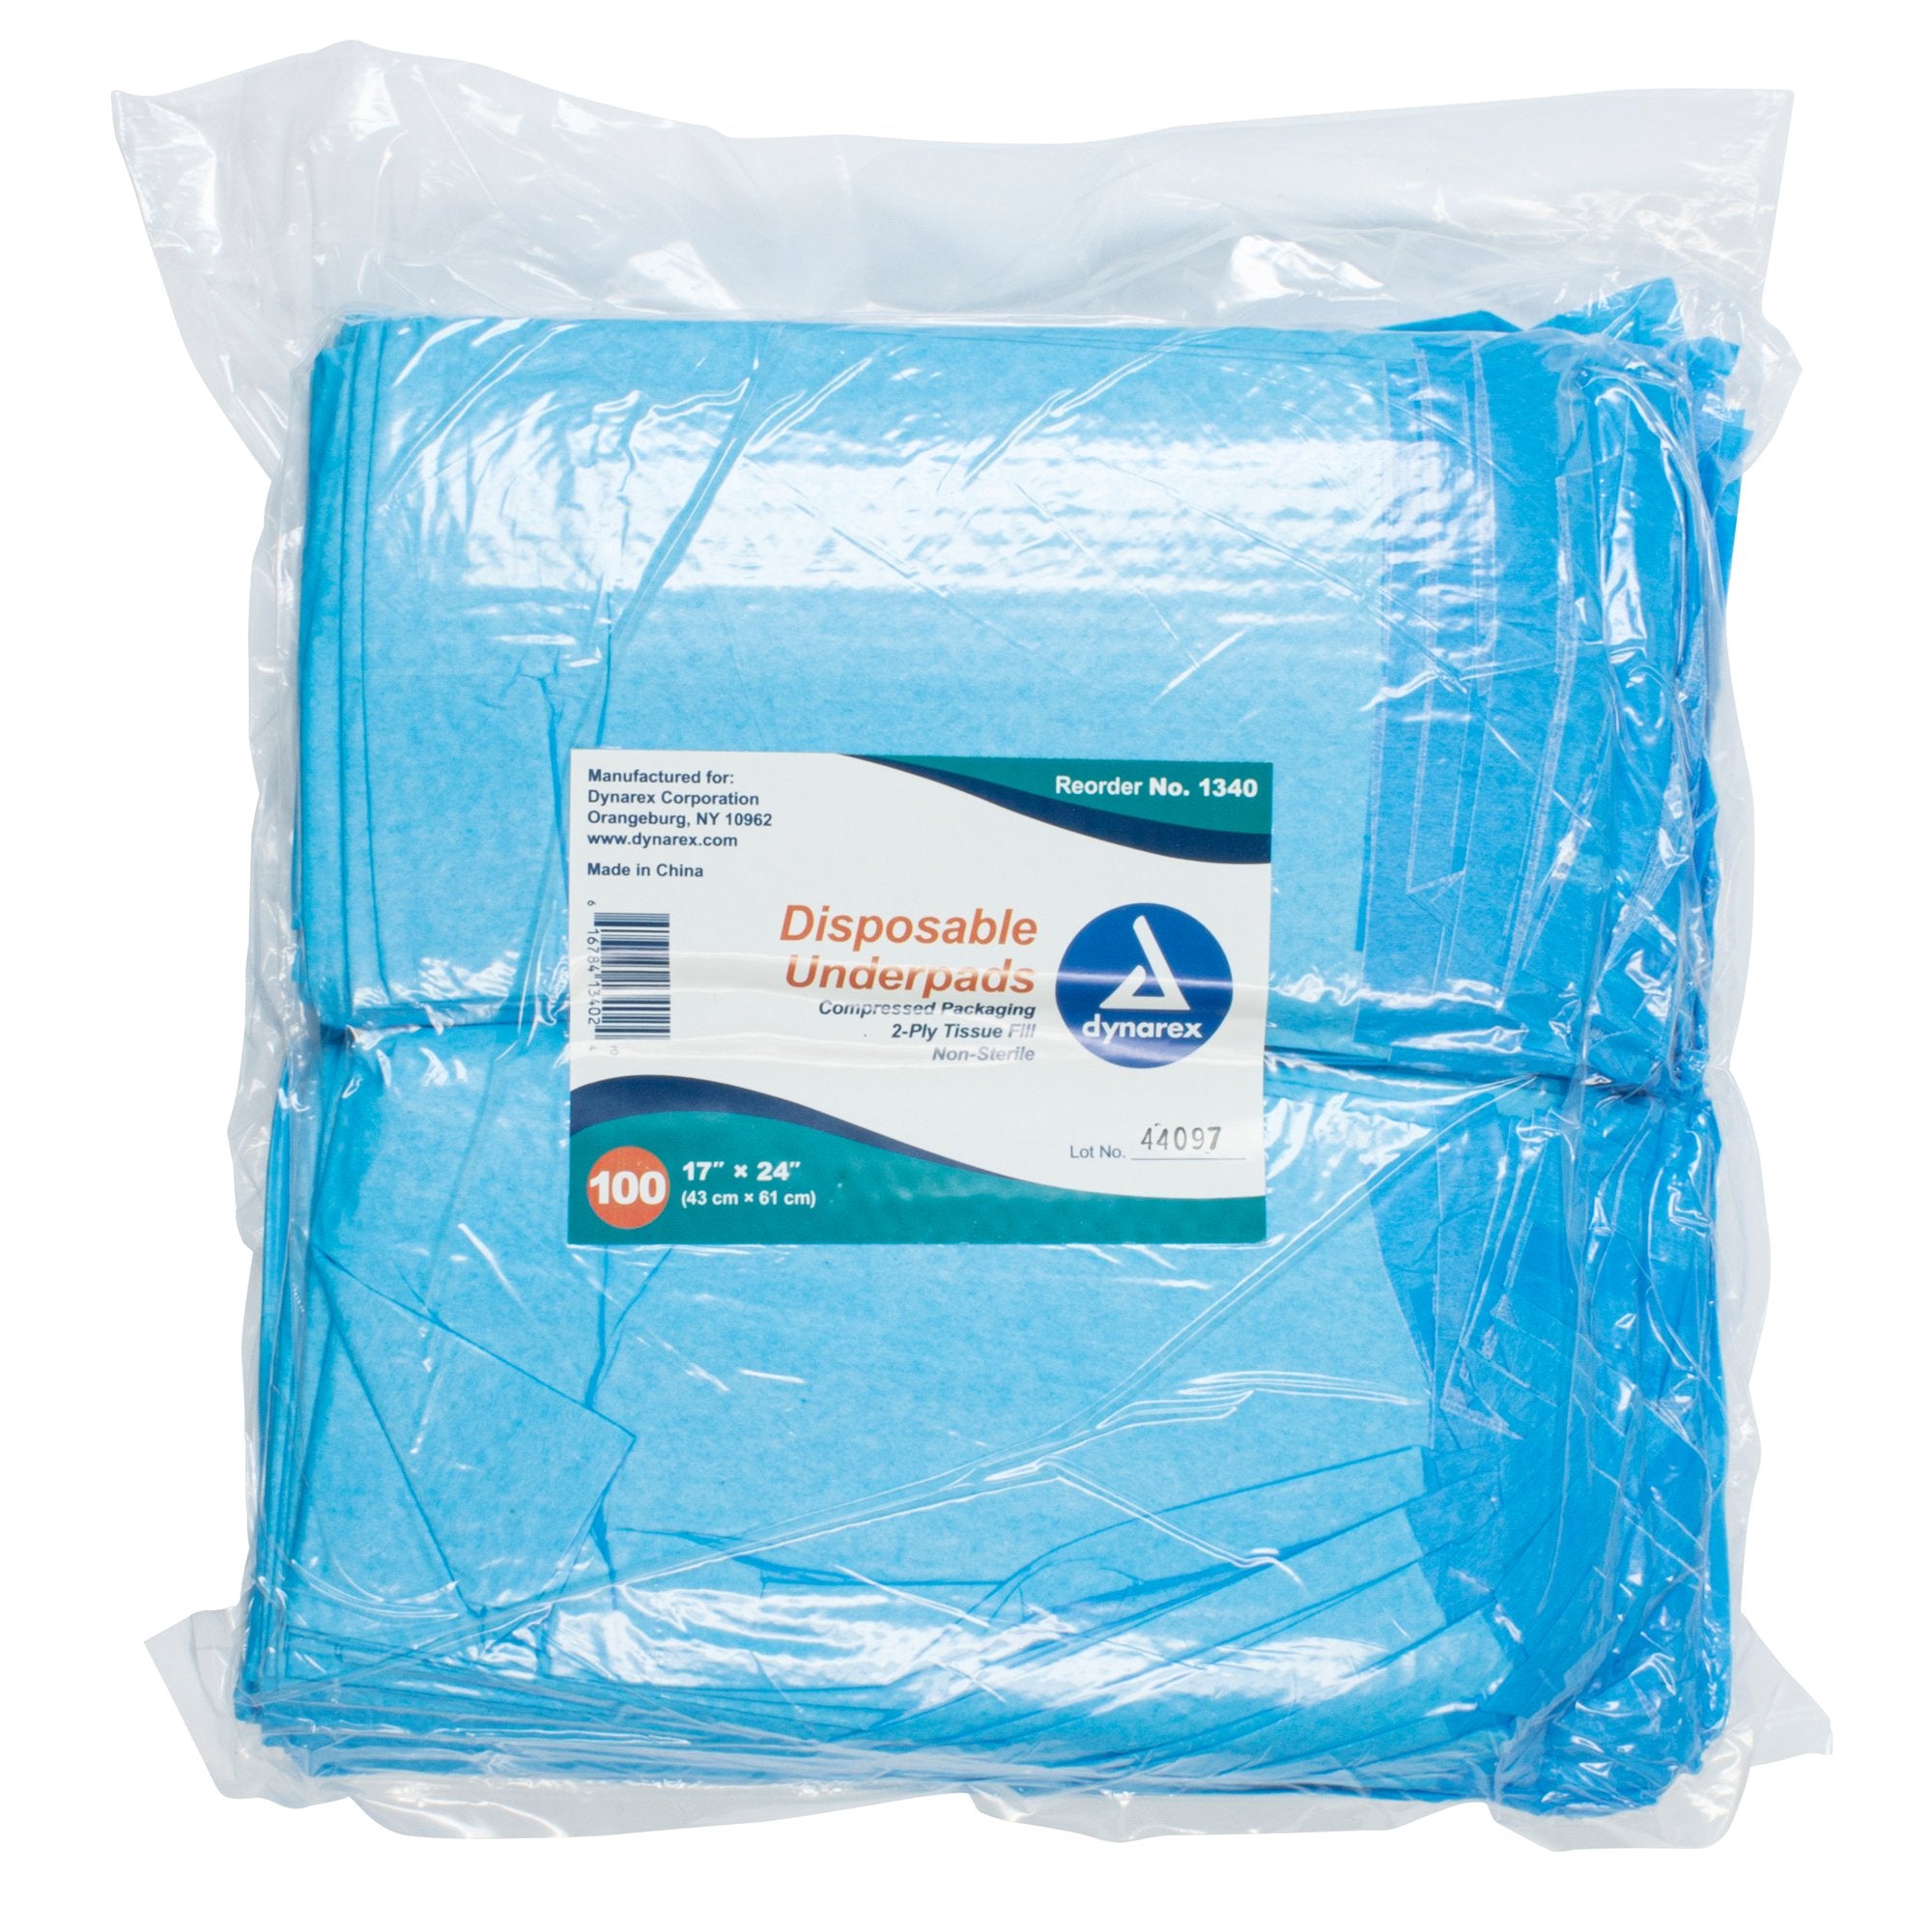 * Dynarex 1340 Disposable Underpads 17 x 24 Inch Fluff Light Absorbency (Bag of 100)